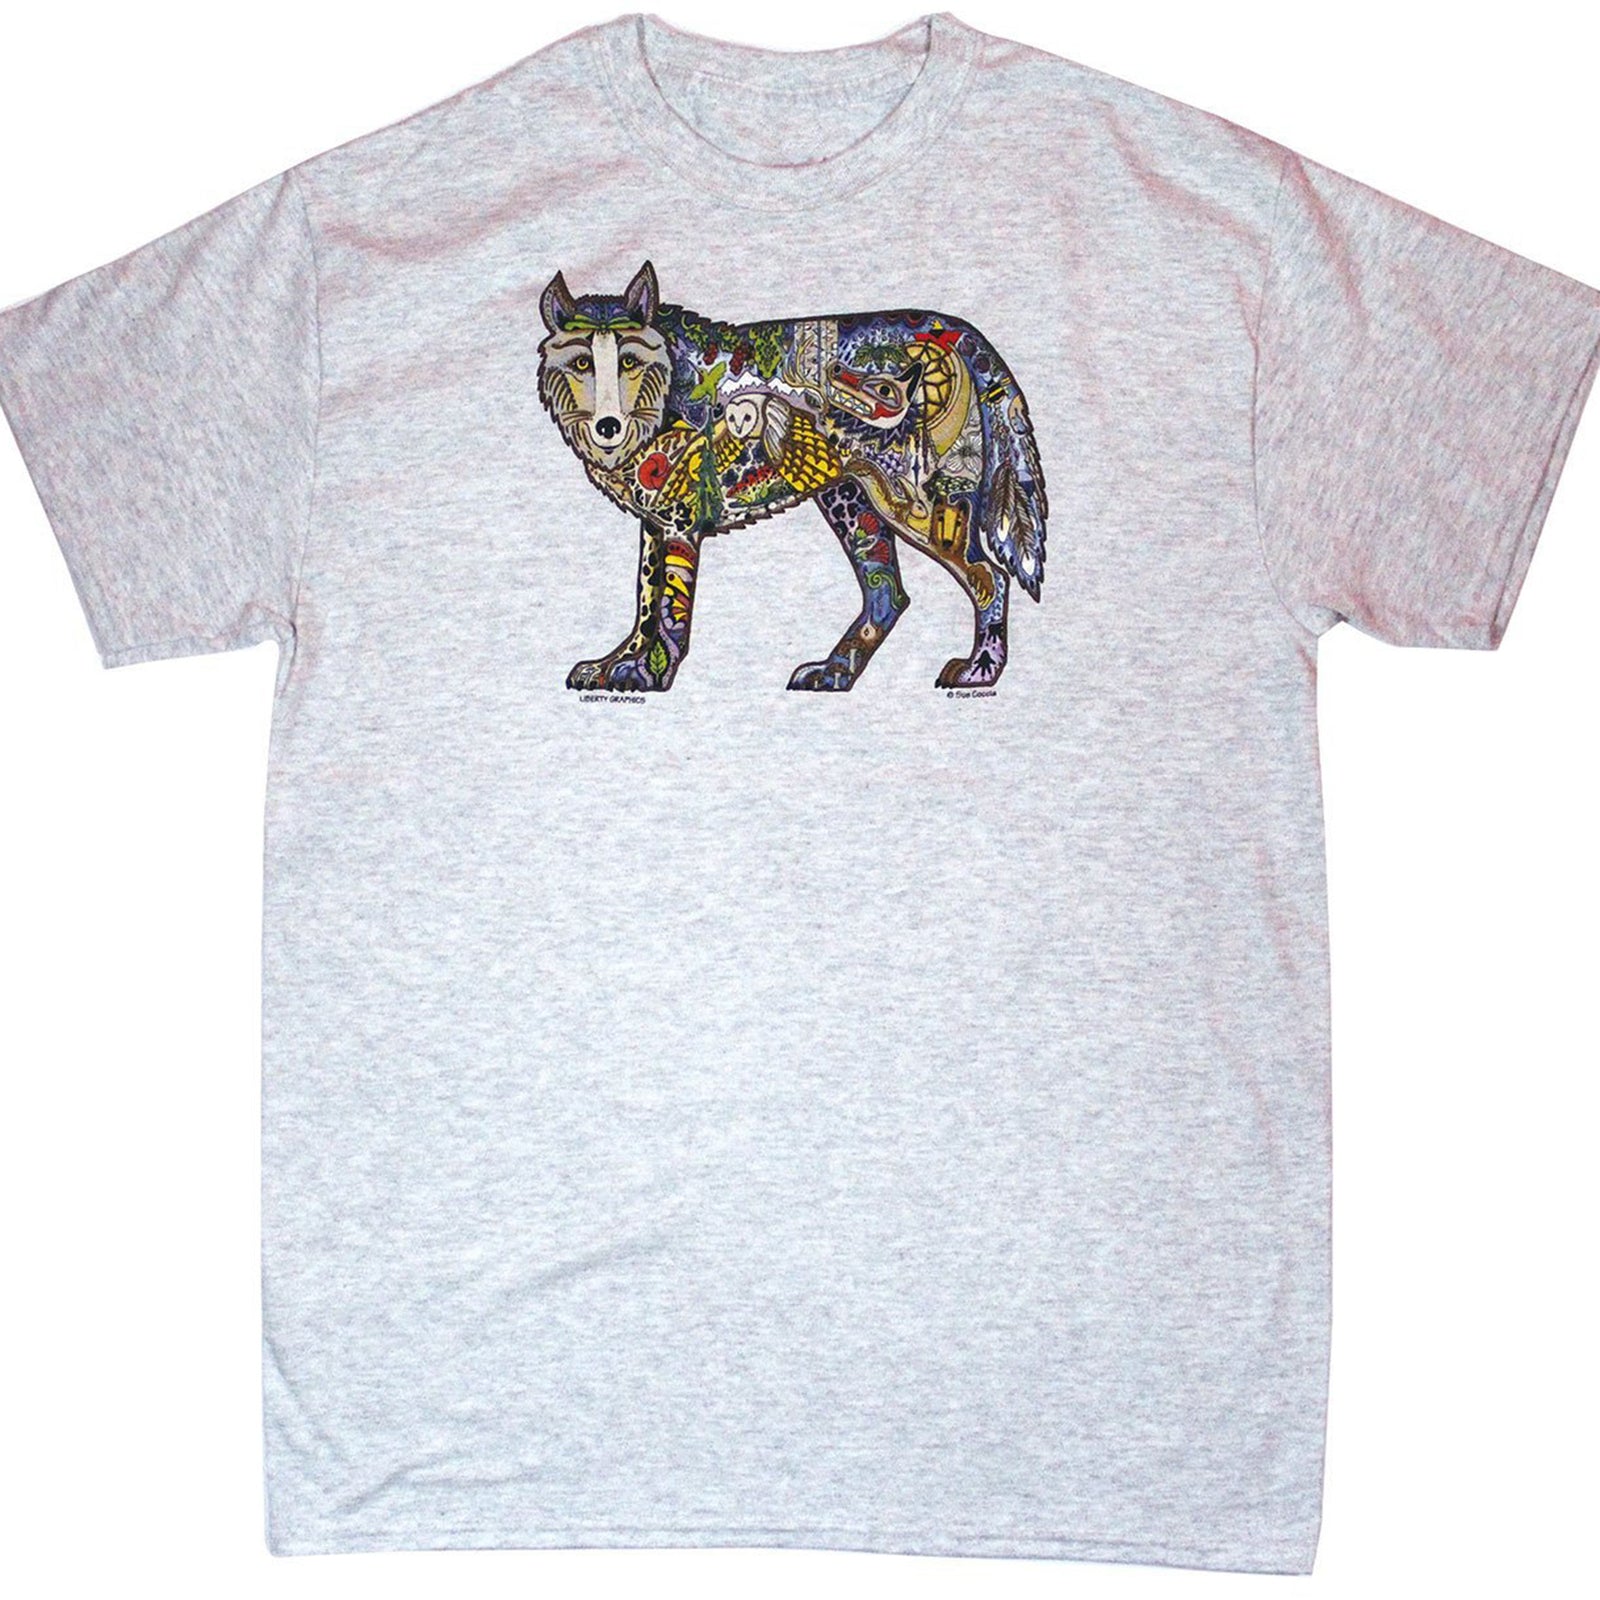 wolf print t shirt showing the entire shirt